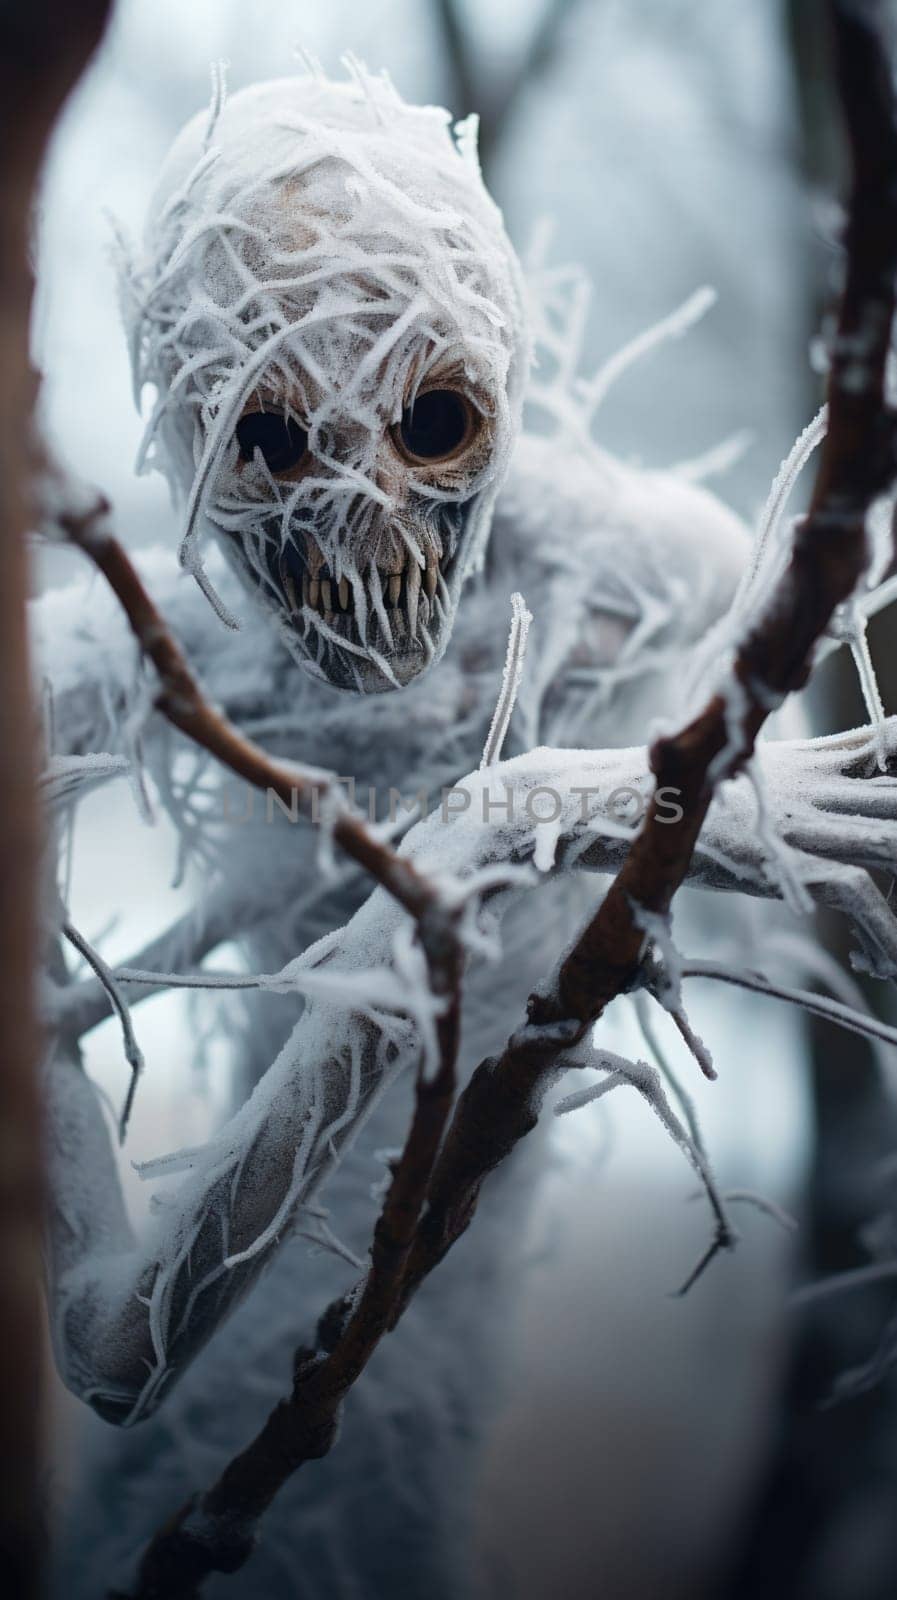 A frozen skeleton monster is covered in ice and snow, AI by starush